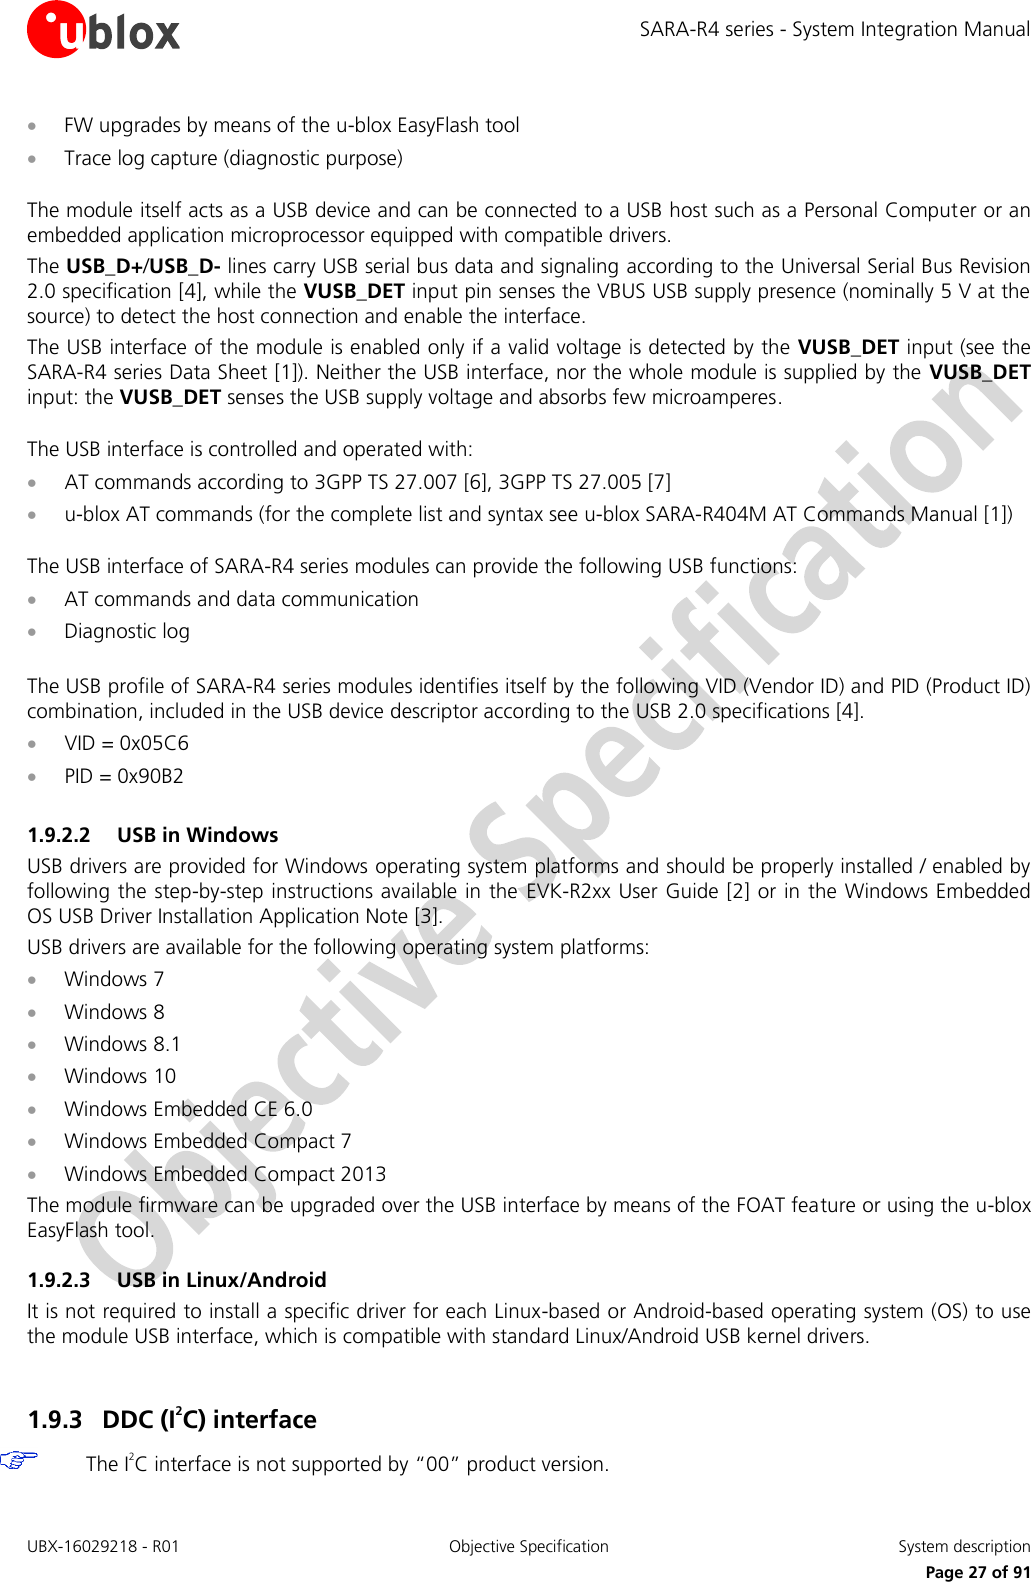 SARA-R4 series - System Integration Manual UBX-16029218 - R01  Objective Specification  System description     Page 27 of 91  FW upgrades by means of the u-blox EasyFlash tool   Trace log capture (diagnostic purpose)  The module itself acts as a USB device and can be connected to a USB host such as a Personal Computer or an embedded application microprocessor equipped with compatible drivers. The USB_D+/USB_D- lines carry USB serial bus data and signaling according to the Universal Serial Bus Revision 2.0 specification [4], while the VUSB_DET input pin senses the VBUS USB supply presence (nominally 5 V at the source) to detect the host connection and enable the interface. The USB interface of the module is enabled only if a valid voltage is detected by the VUSB_DET input (see the SARA-R4 series Data Sheet [1]). Neither the USB interface, nor the whole module is supplied by the VUSB_DET input: the VUSB_DET senses the USB supply voltage and absorbs few microamperes.  The USB interface is controlled and operated with:  AT commands according to 3GPP TS 27.007 [6], 3GPP TS 27.005 [7]  u-blox AT commands (for the complete list and syntax see u-blox SARA-R404M AT Commands Manual [1])  The USB interface of SARA-R4 series modules can provide the following USB functions:  AT commands and data communication  Diagnostic log  The USB profile of SARA-R4 series modules identifies itself by the following VID (Vendor ID) and PID (Product ID) combination, included in the USB device descriptor according to the USB 2.0 specifications [4].  VID = 0x05C6  PID = 0x90B2  1.9.2.2 USB in Windows USB drivers are provided for Windows operating system platforms and should be properly installed / enabled by following the step-by-step instructions available in the EVK-R2xx User Guide [2] or in the Windows Embedded OS USB Driver Installation Application Note [3]. USB drivers are available for the following operating system platforms:  Windows 7  Windows 8  Windows 8.1  Windows 10  Windows Embedded CE 6.0  Windows Embedded Compact 7  Windows Embedded Compact 2013 The module firmware can be upgraded over the USB interface by means of the FOAT feature or using the u-blox EasyFlash tool. 1.9.2.3 USB in Linux/Android It is not required to install a specific driver for each Linux-based or Android-based operating system (OS) to use the module USB interface, which is compatible with standard Linux/Android USB kernel drivers.  1.9.3 DDC (I2C) interface  The I2C interface is not supported by “00” product version.  